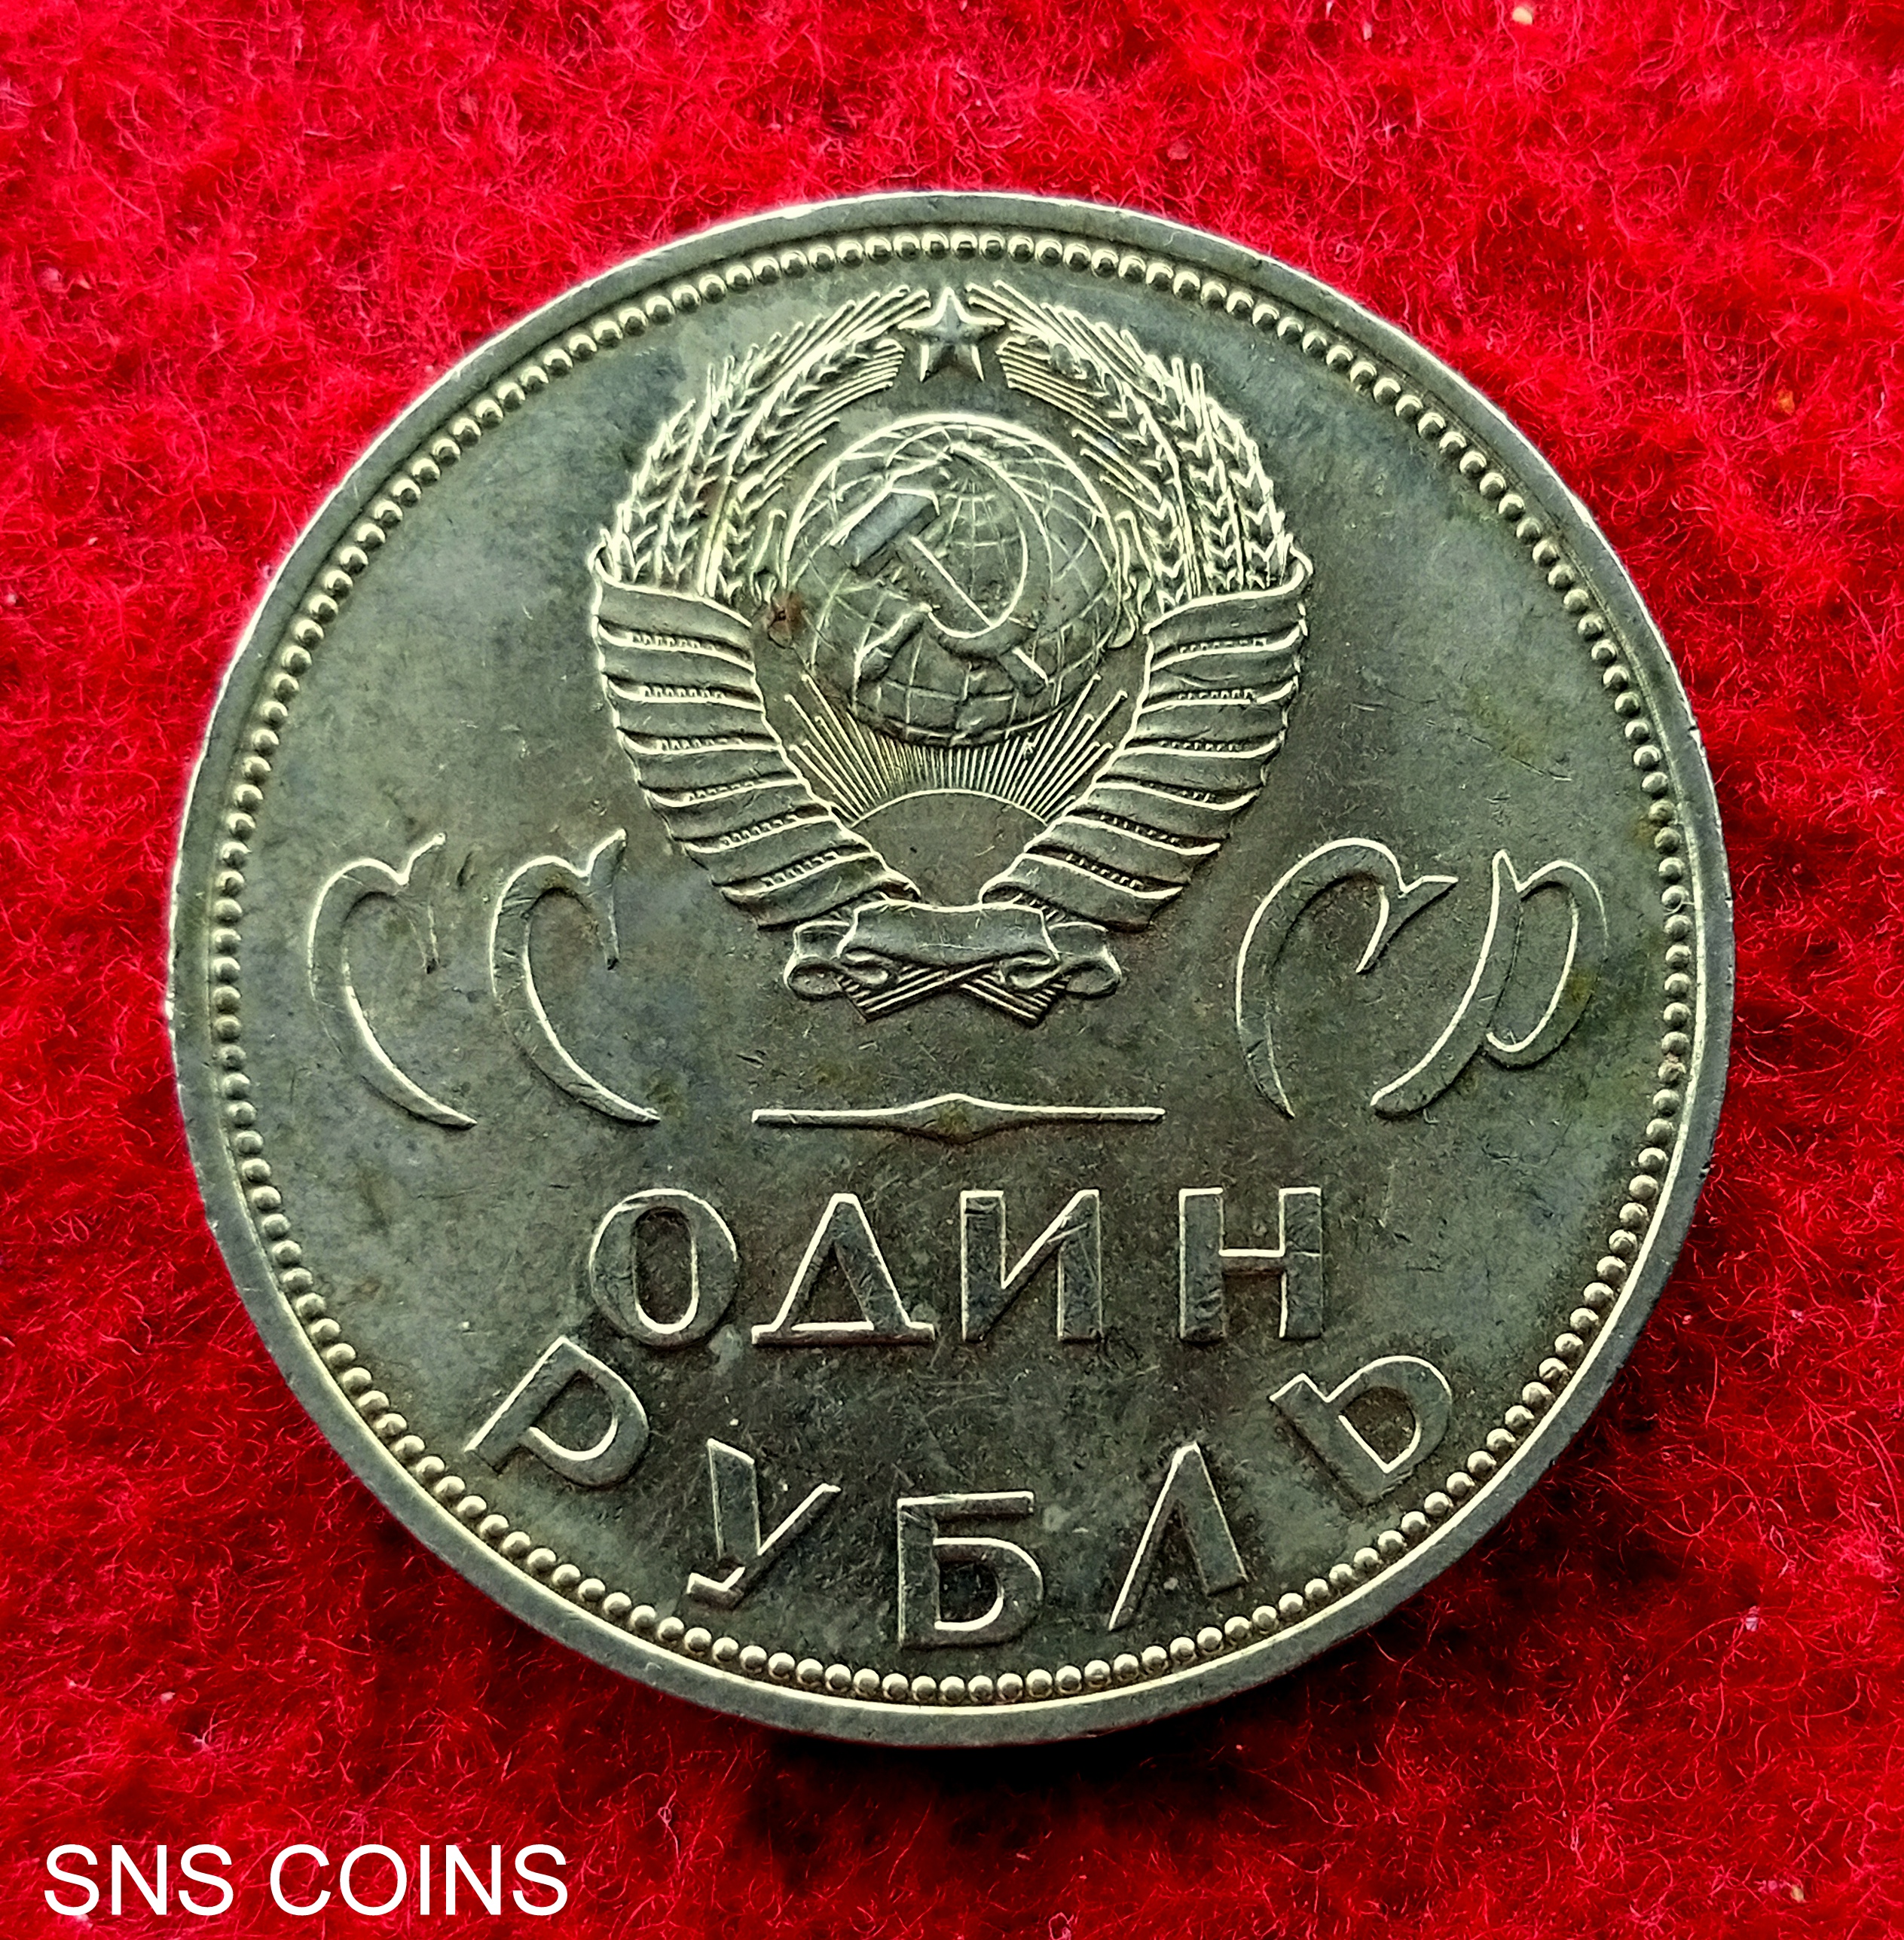 Soviet Union (Russia) 1 Ruble 20th Anniversary of the Victory in